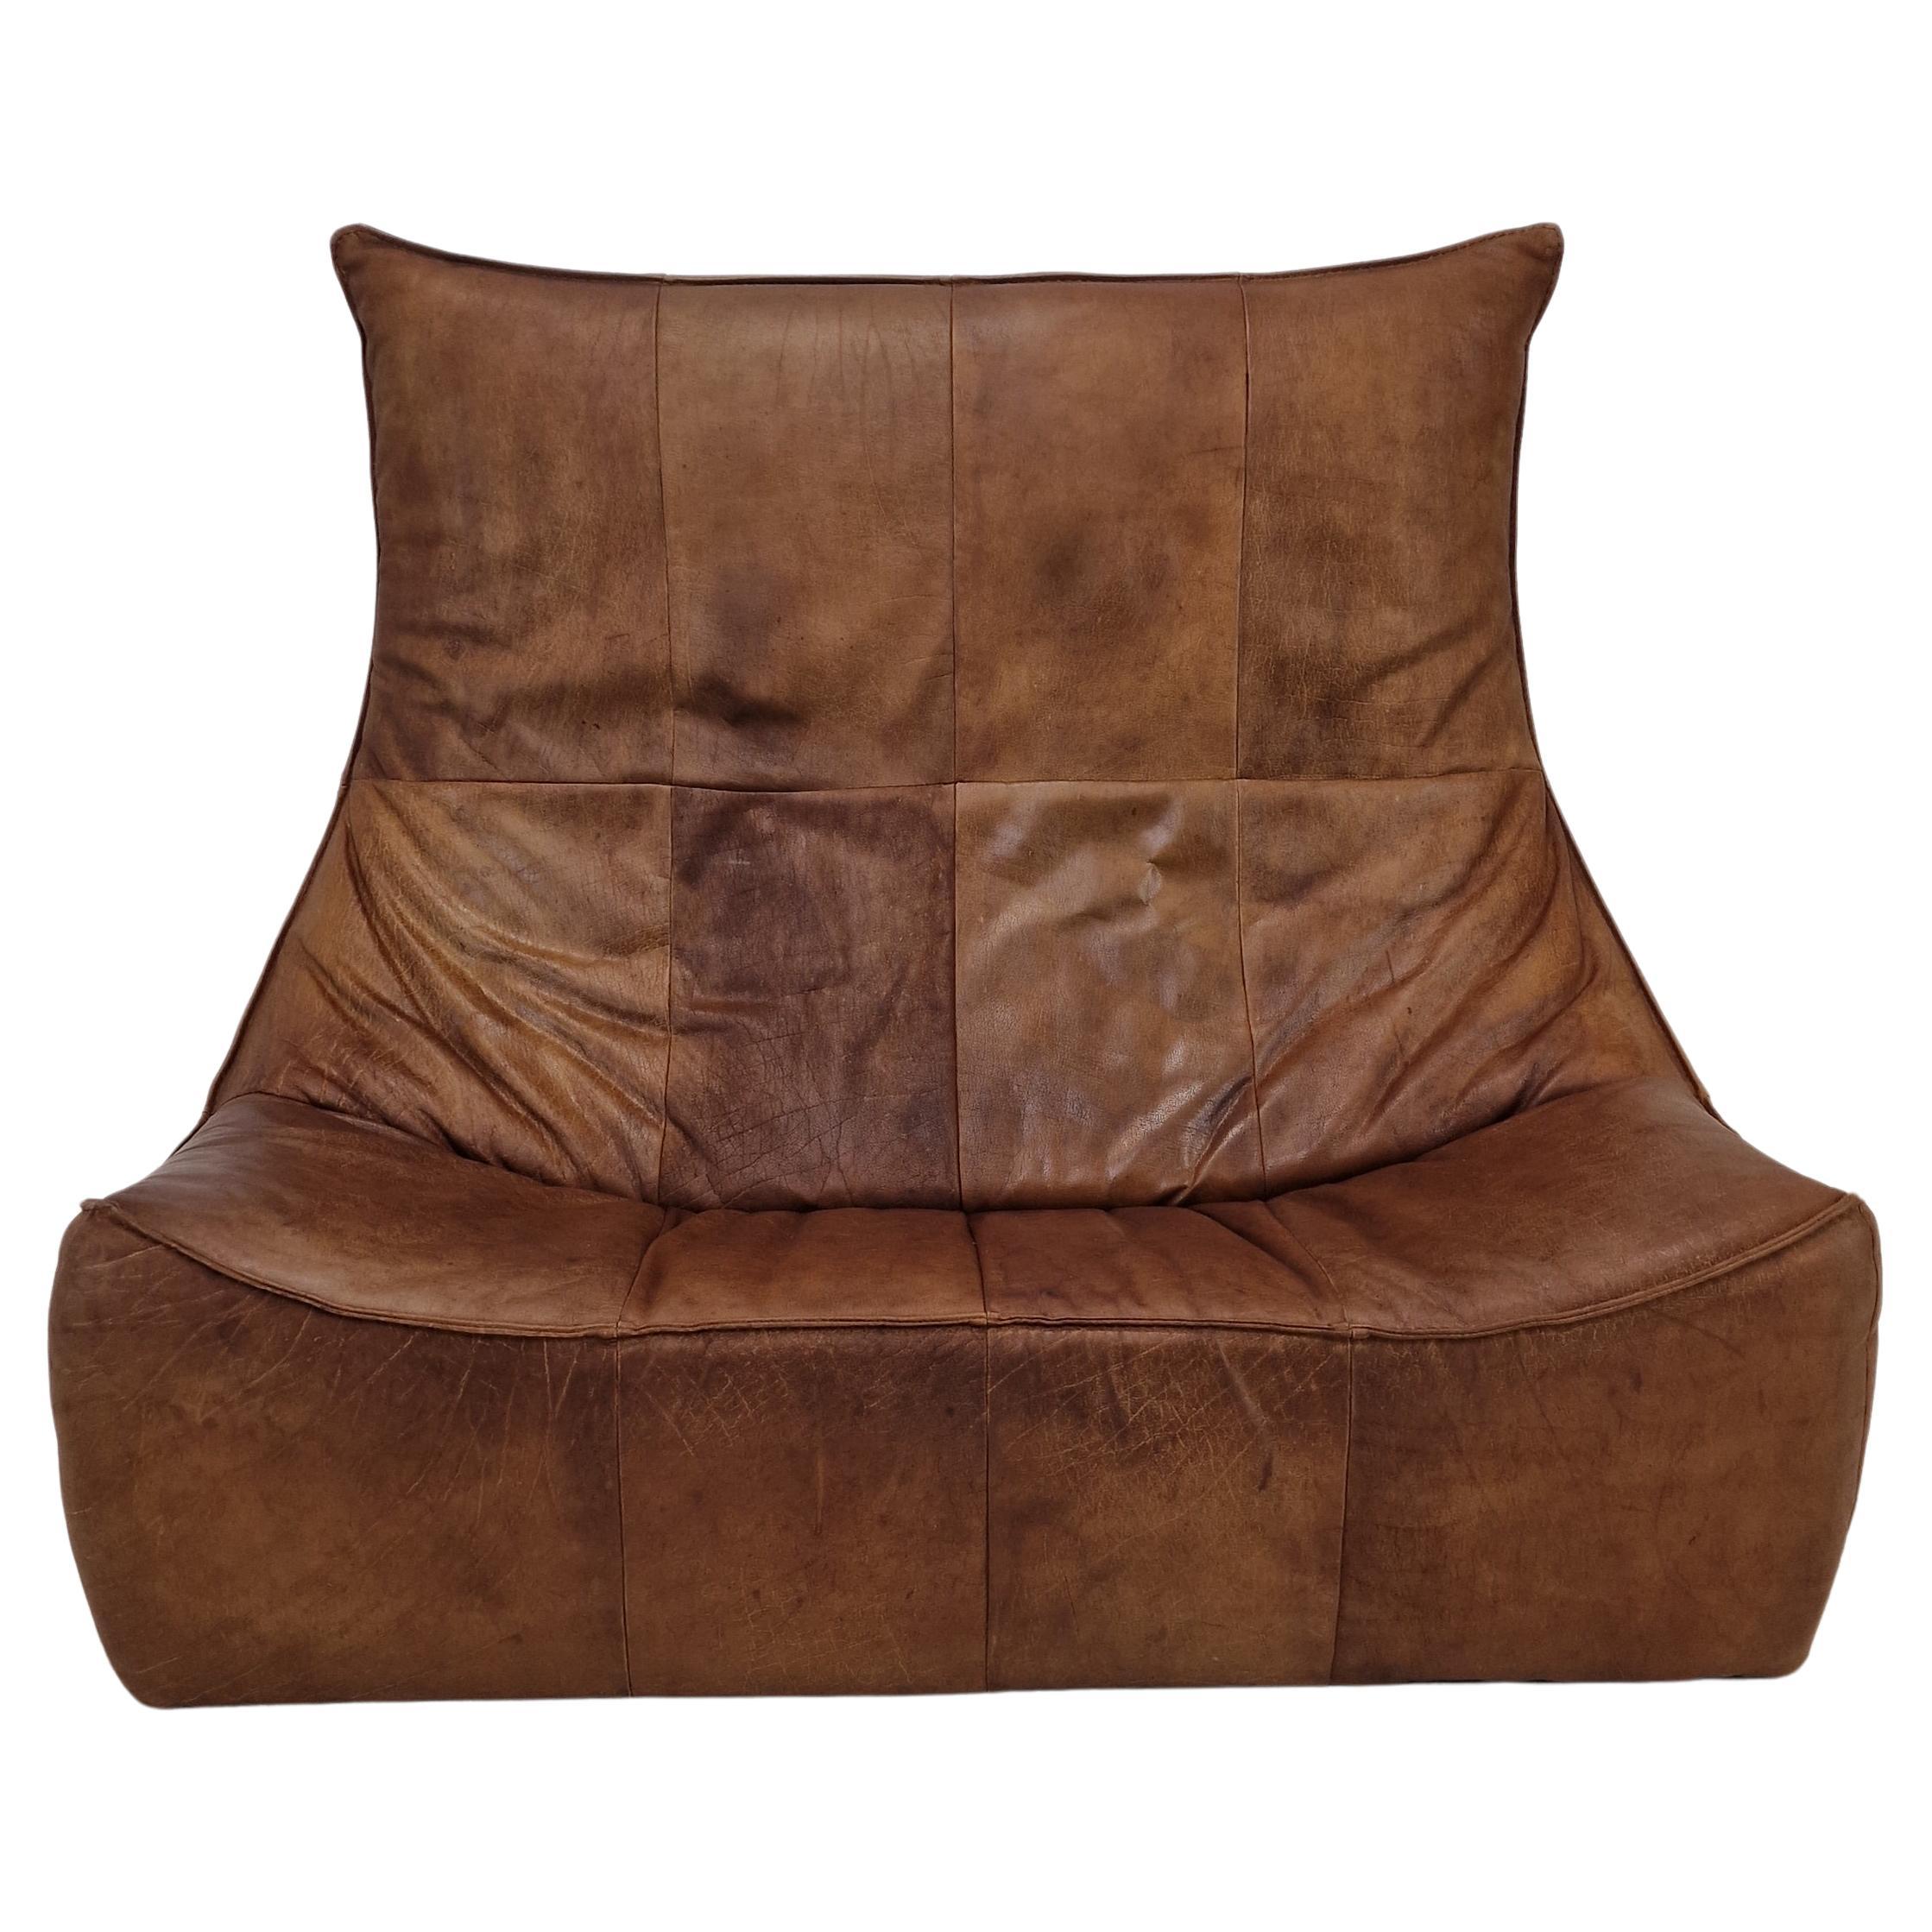 Montis “The Rock” Sofa In Brown Leather By Gerard Van Den Berg, 1970s For Sale